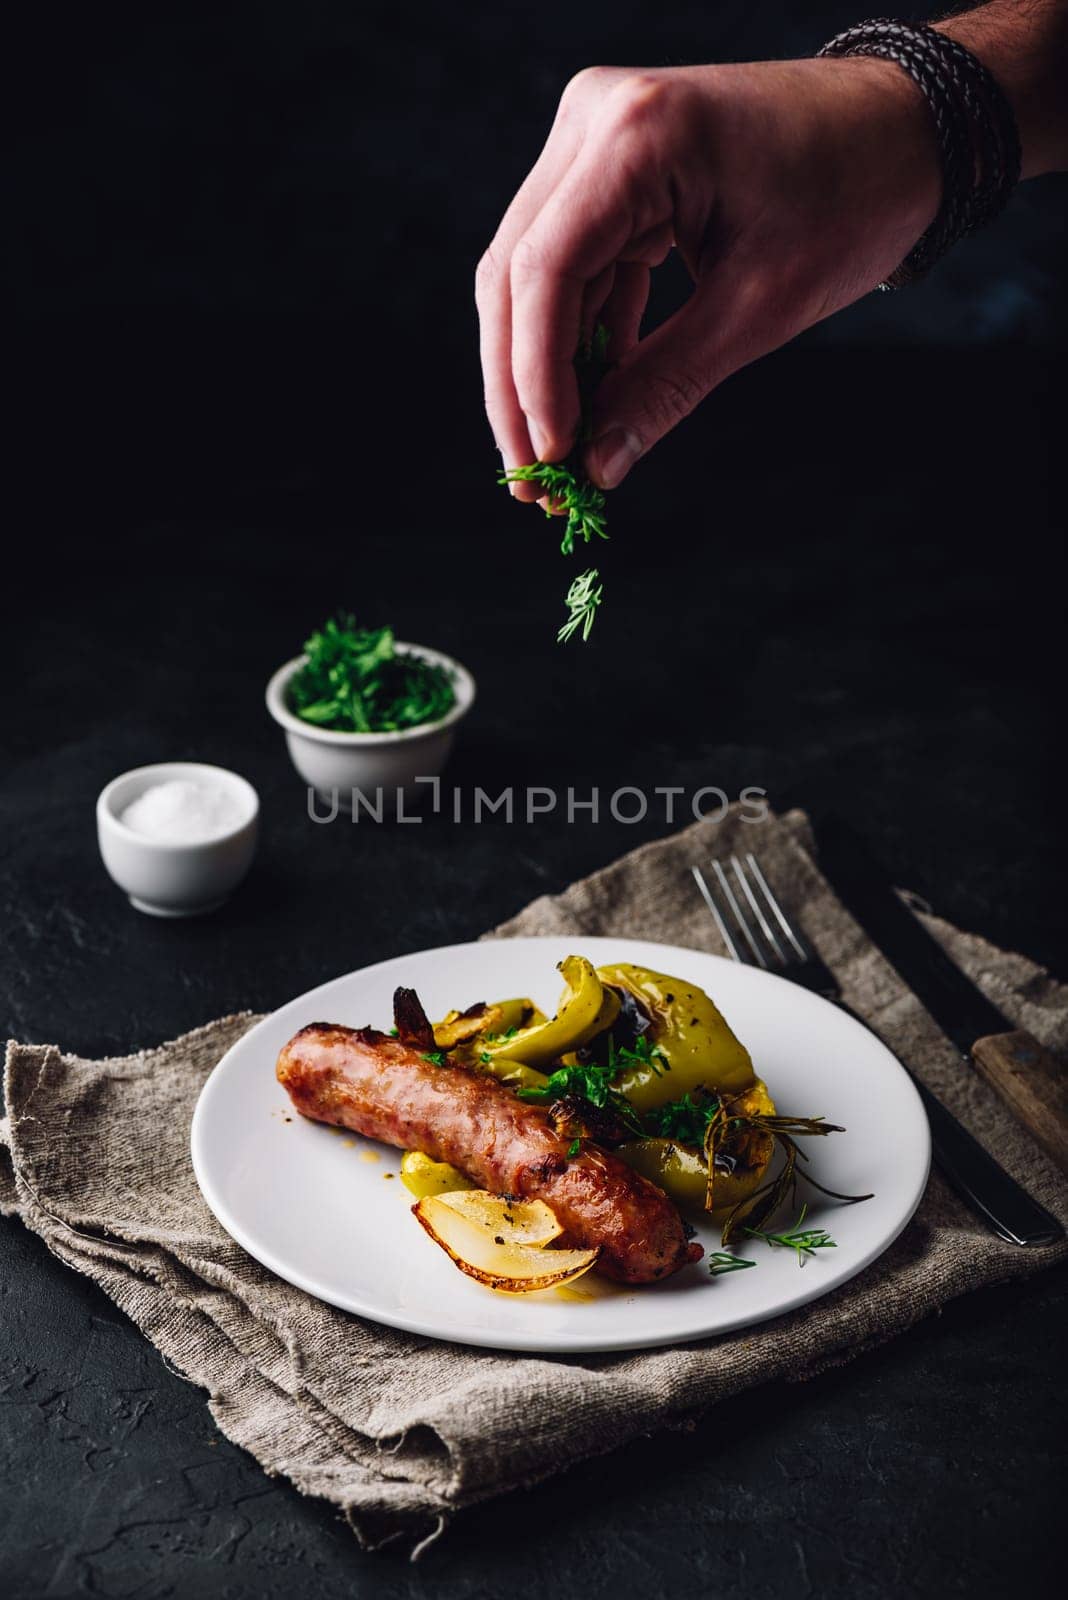 Pork sausage with bell peppers, onions and different herbs by Seva_blsv